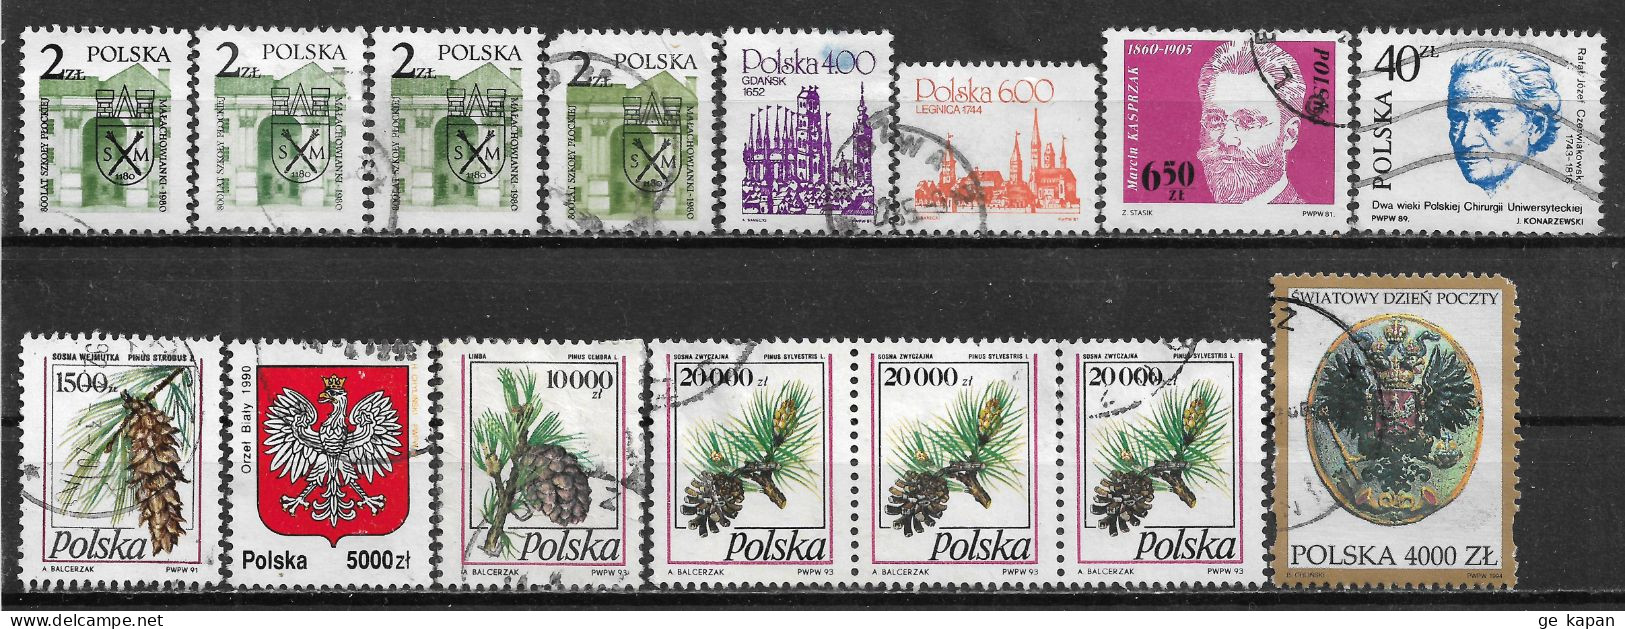 1980-1994 POLAND Lot Of 15 Used Stamps MICHEL CV €11.90 - Usados